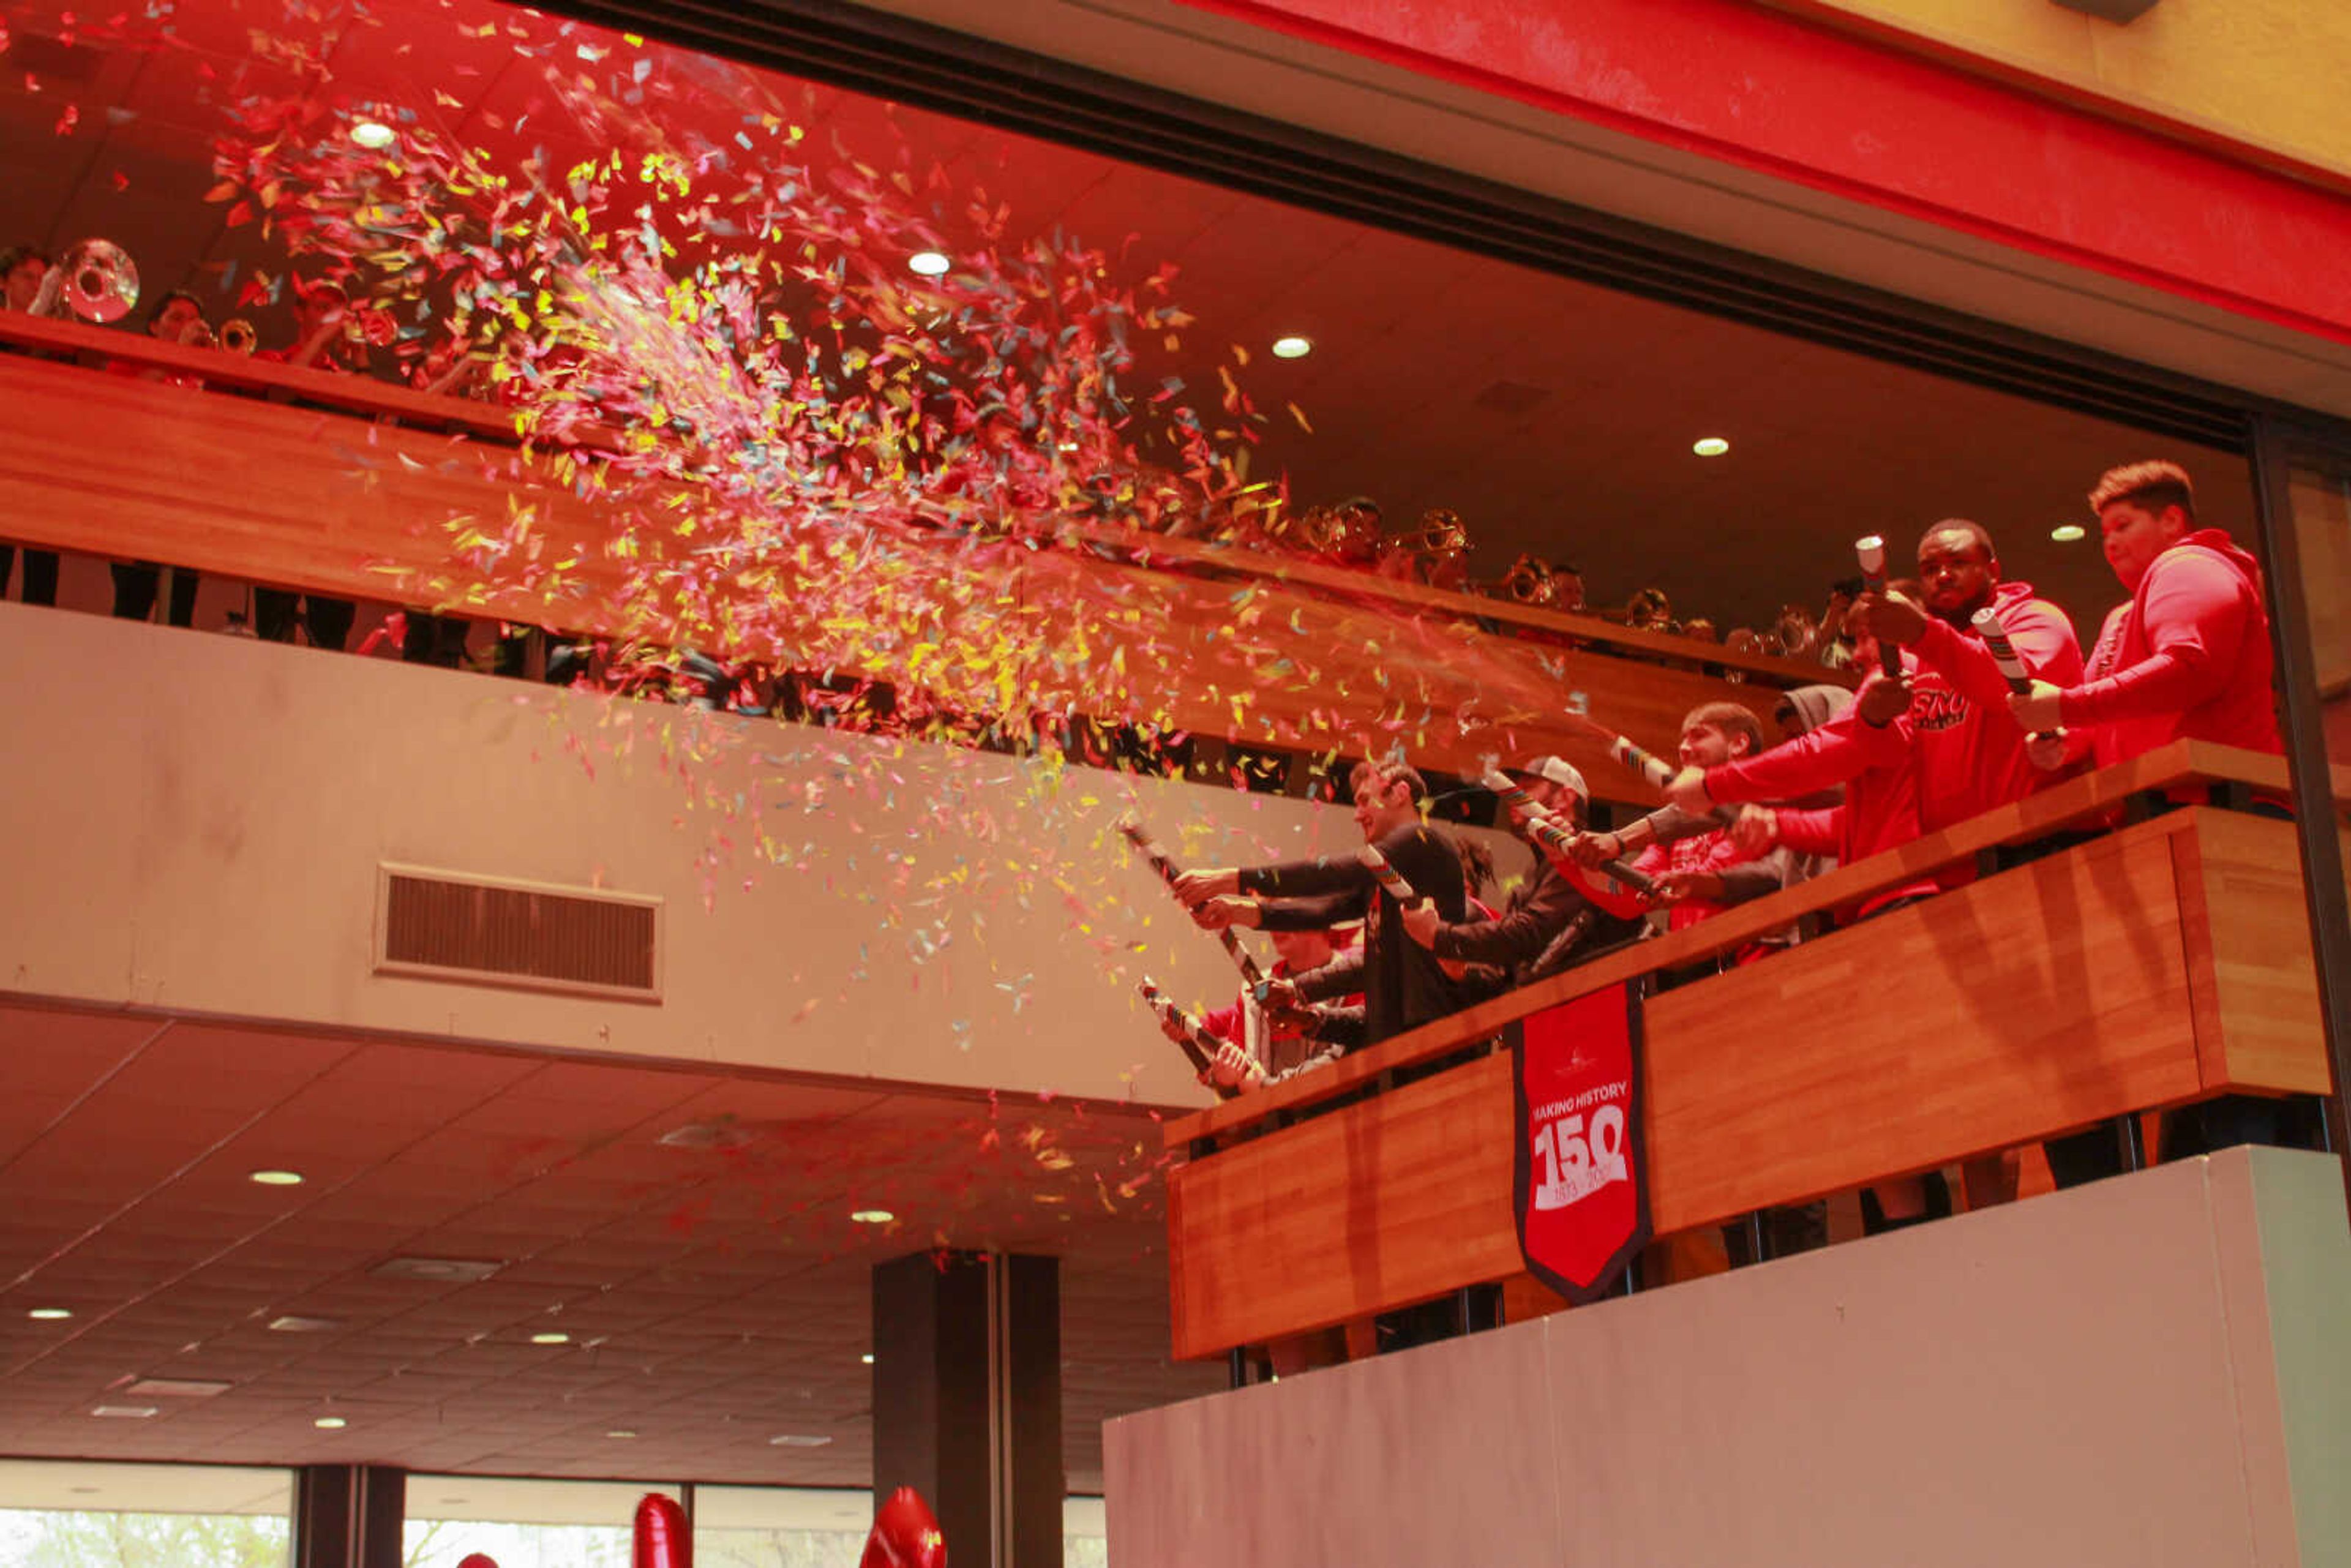 SEMO students shoot confetti to celebrate the University's 150 anniversary. A large SEMO present was opened at the same time, and held sesquicentennial t-shirts inside.